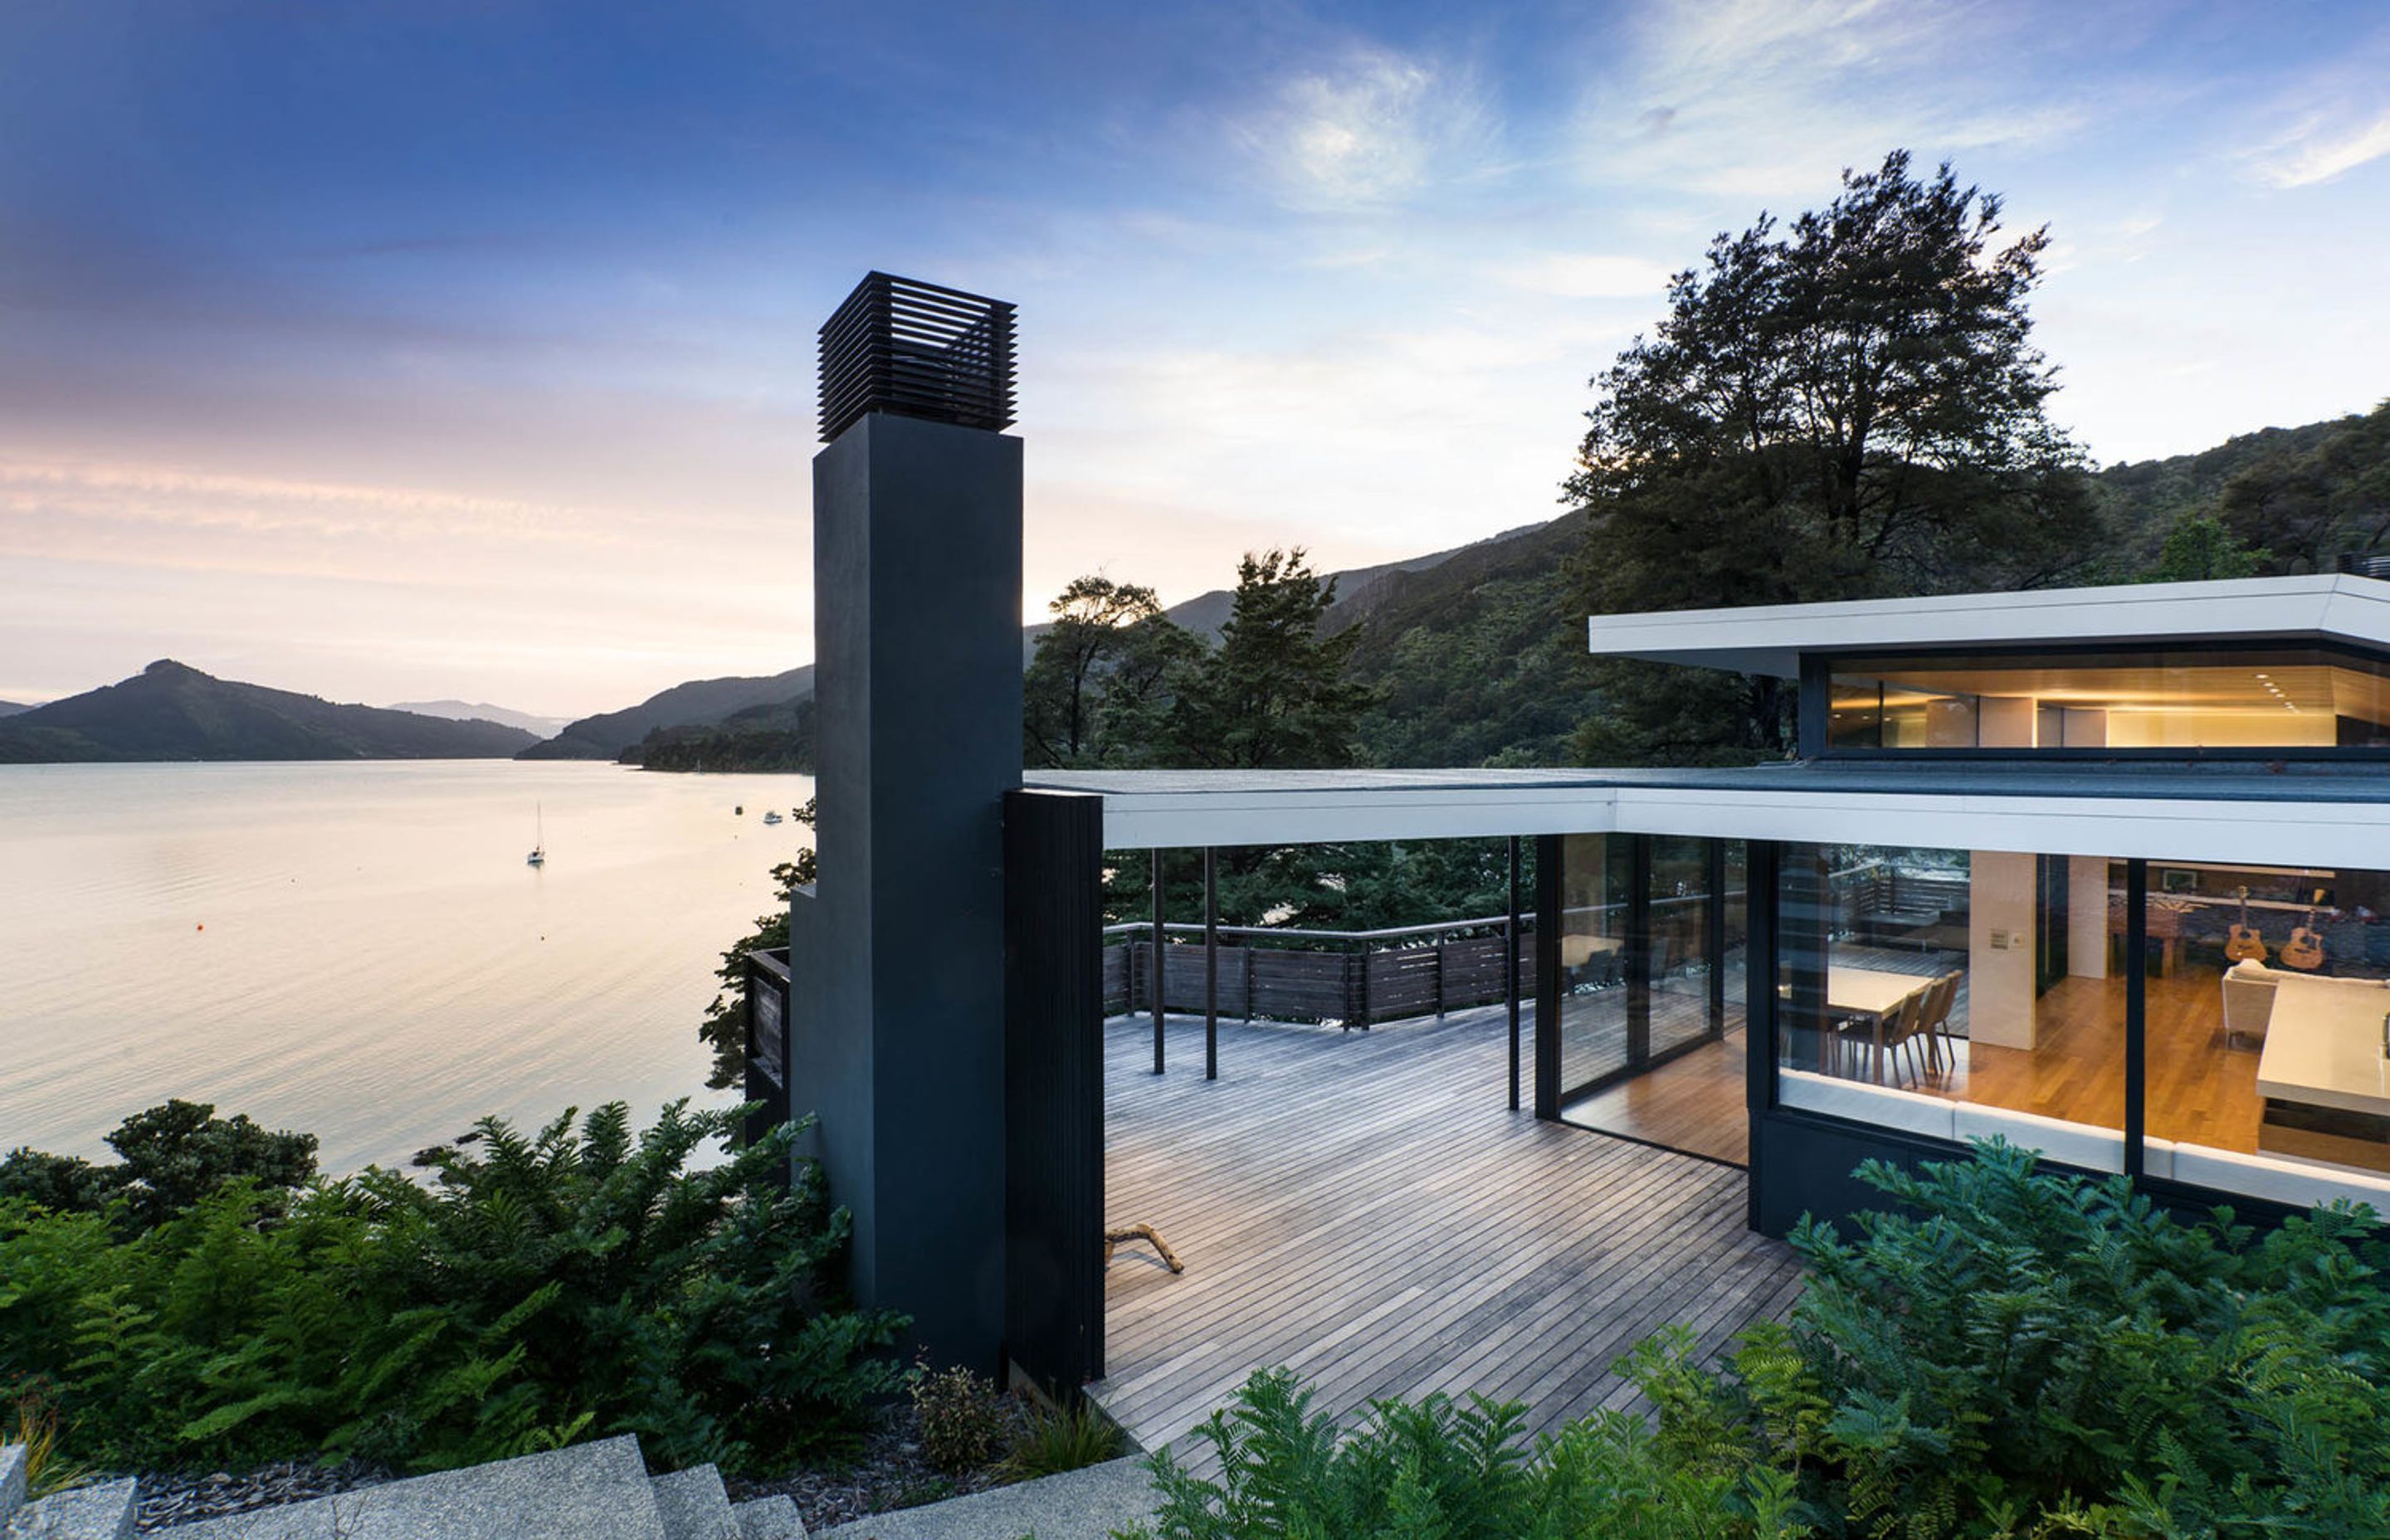 Moetapu Beach House by Parsonson Architects sits at the bottom of a steep, winding driveway and looks out to Pelorus Sound.
Its roof form helps ‘fold’ the house into the shape of the land around a small central courtyard area. Photograph by Paul McCredie.